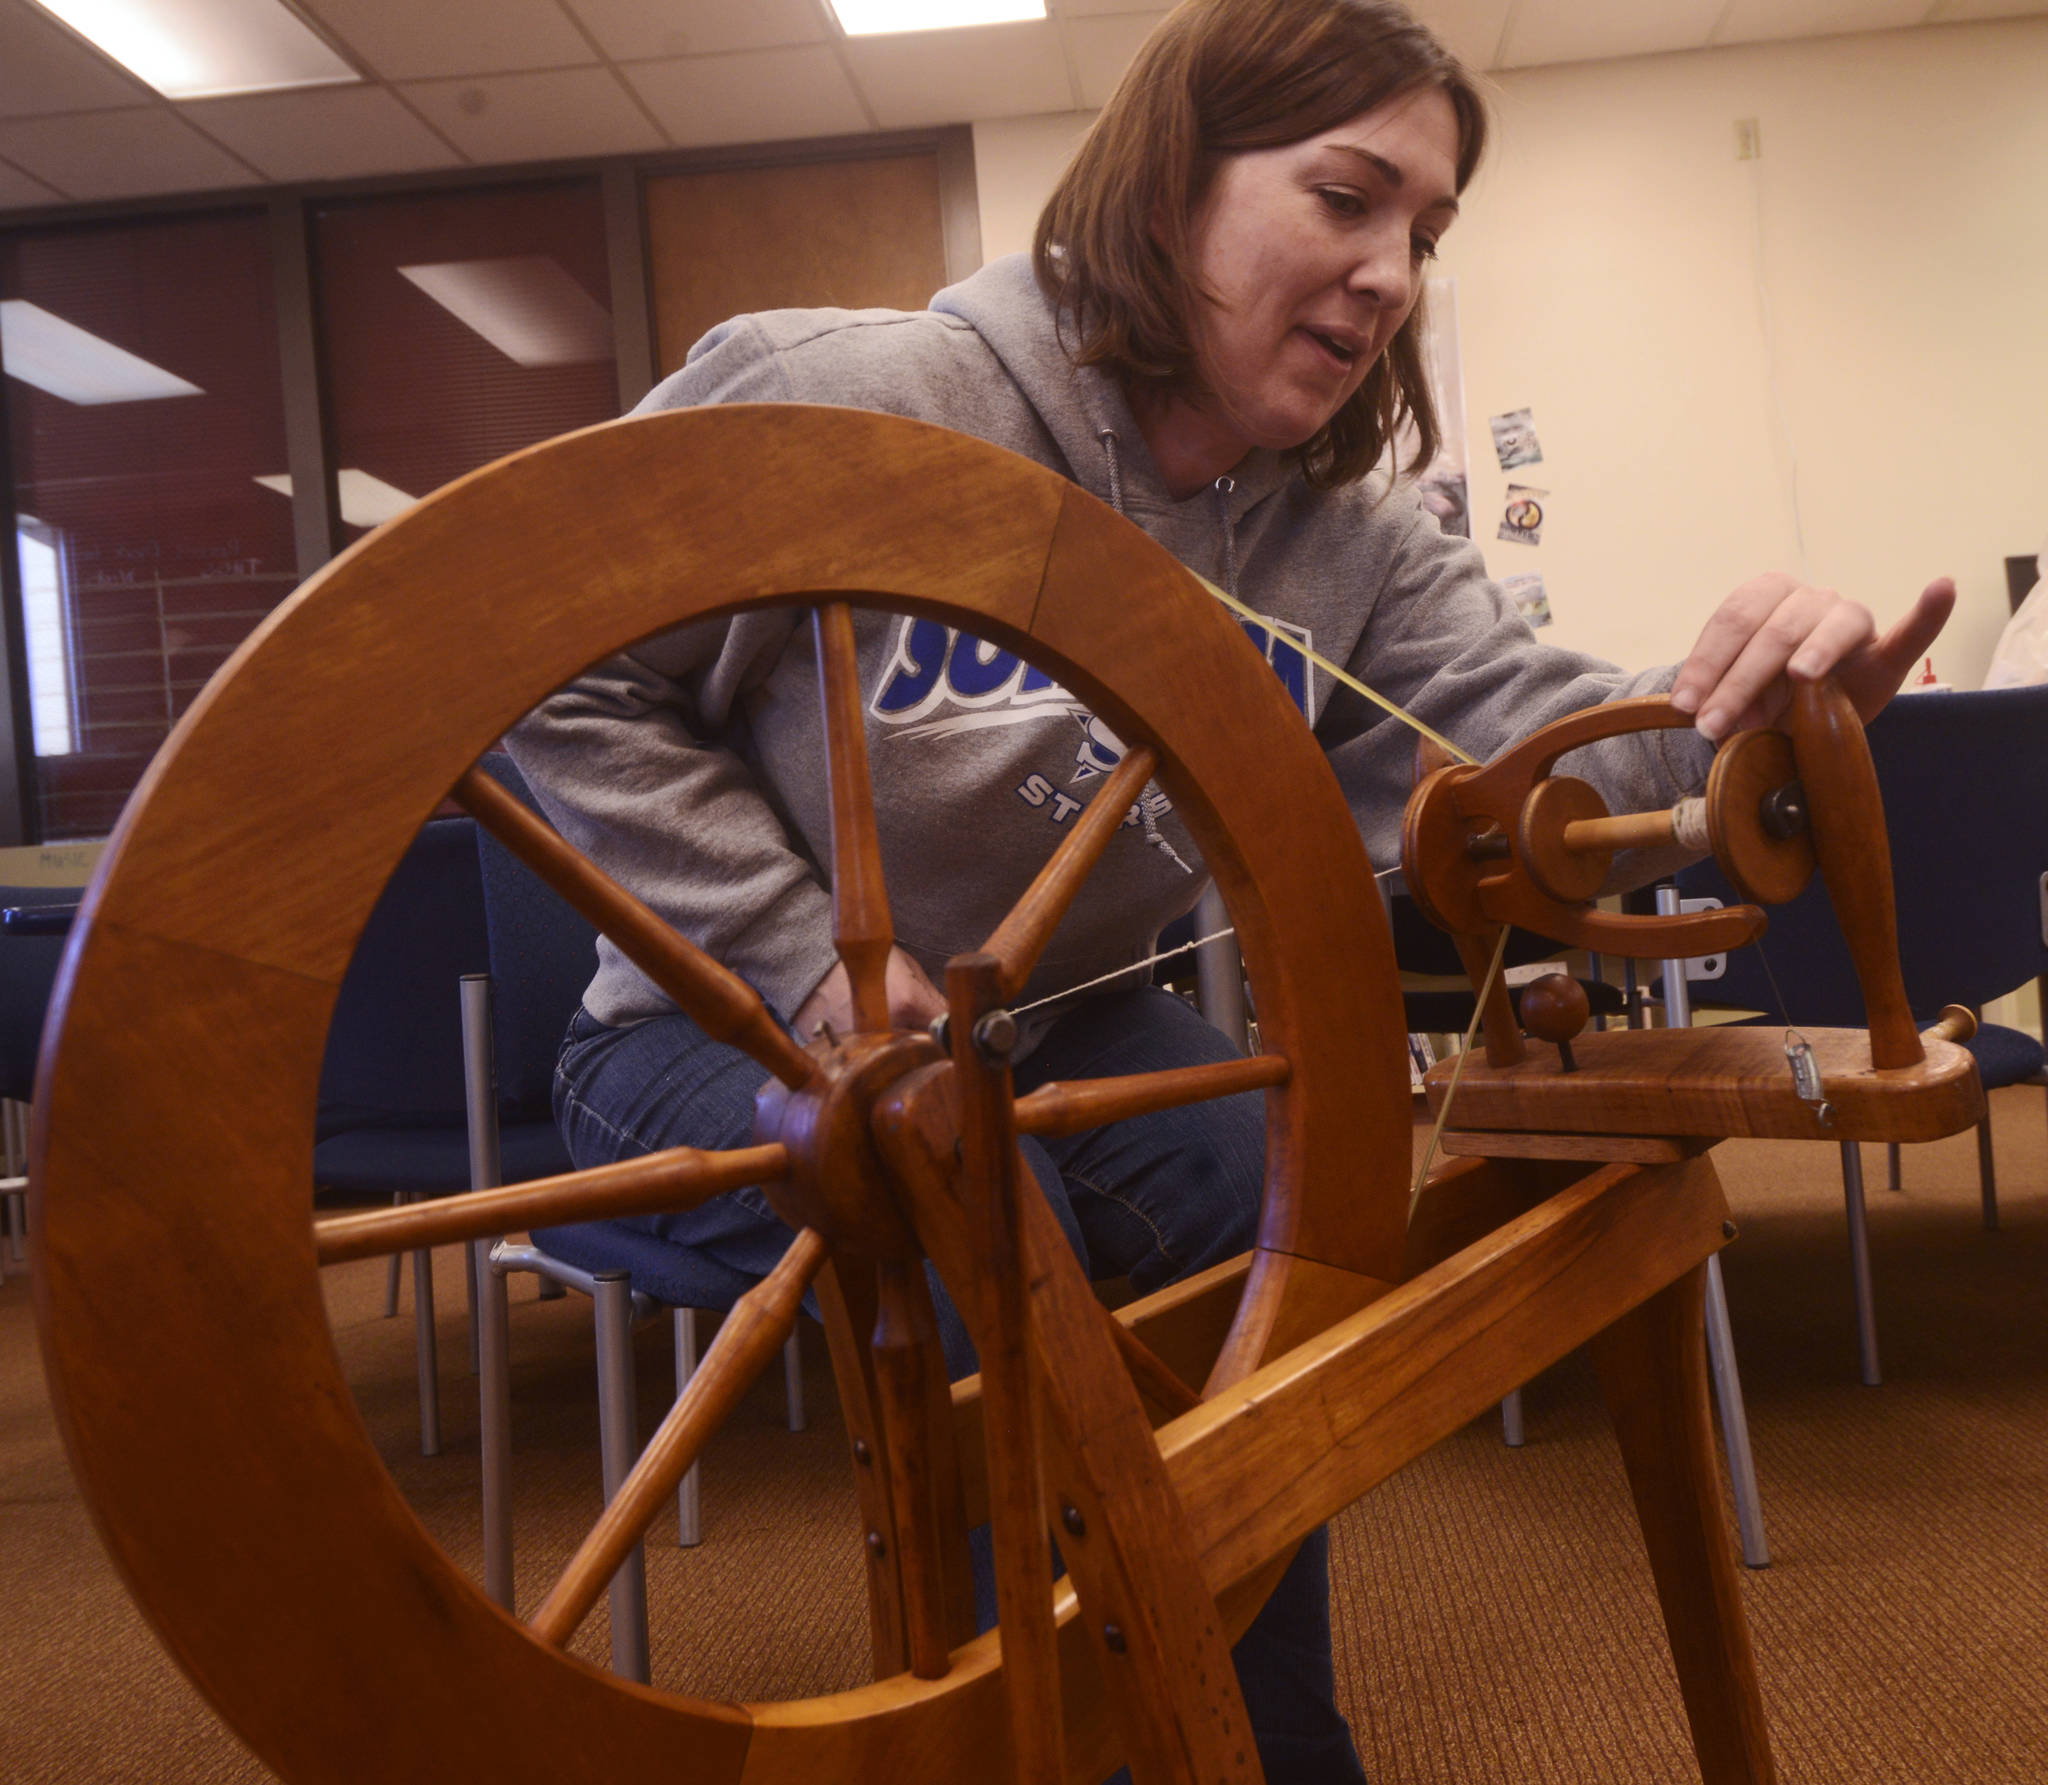 Suzanne Hall prepares to spin wool into yarn during the first session of the Soldotna Community Schools yarn-spinning class on Tuesday, March 20 in the library of the Soldotna Preparatory School in Soldotna, Alaska. (Ben Boettger/Peninsula Clarion)